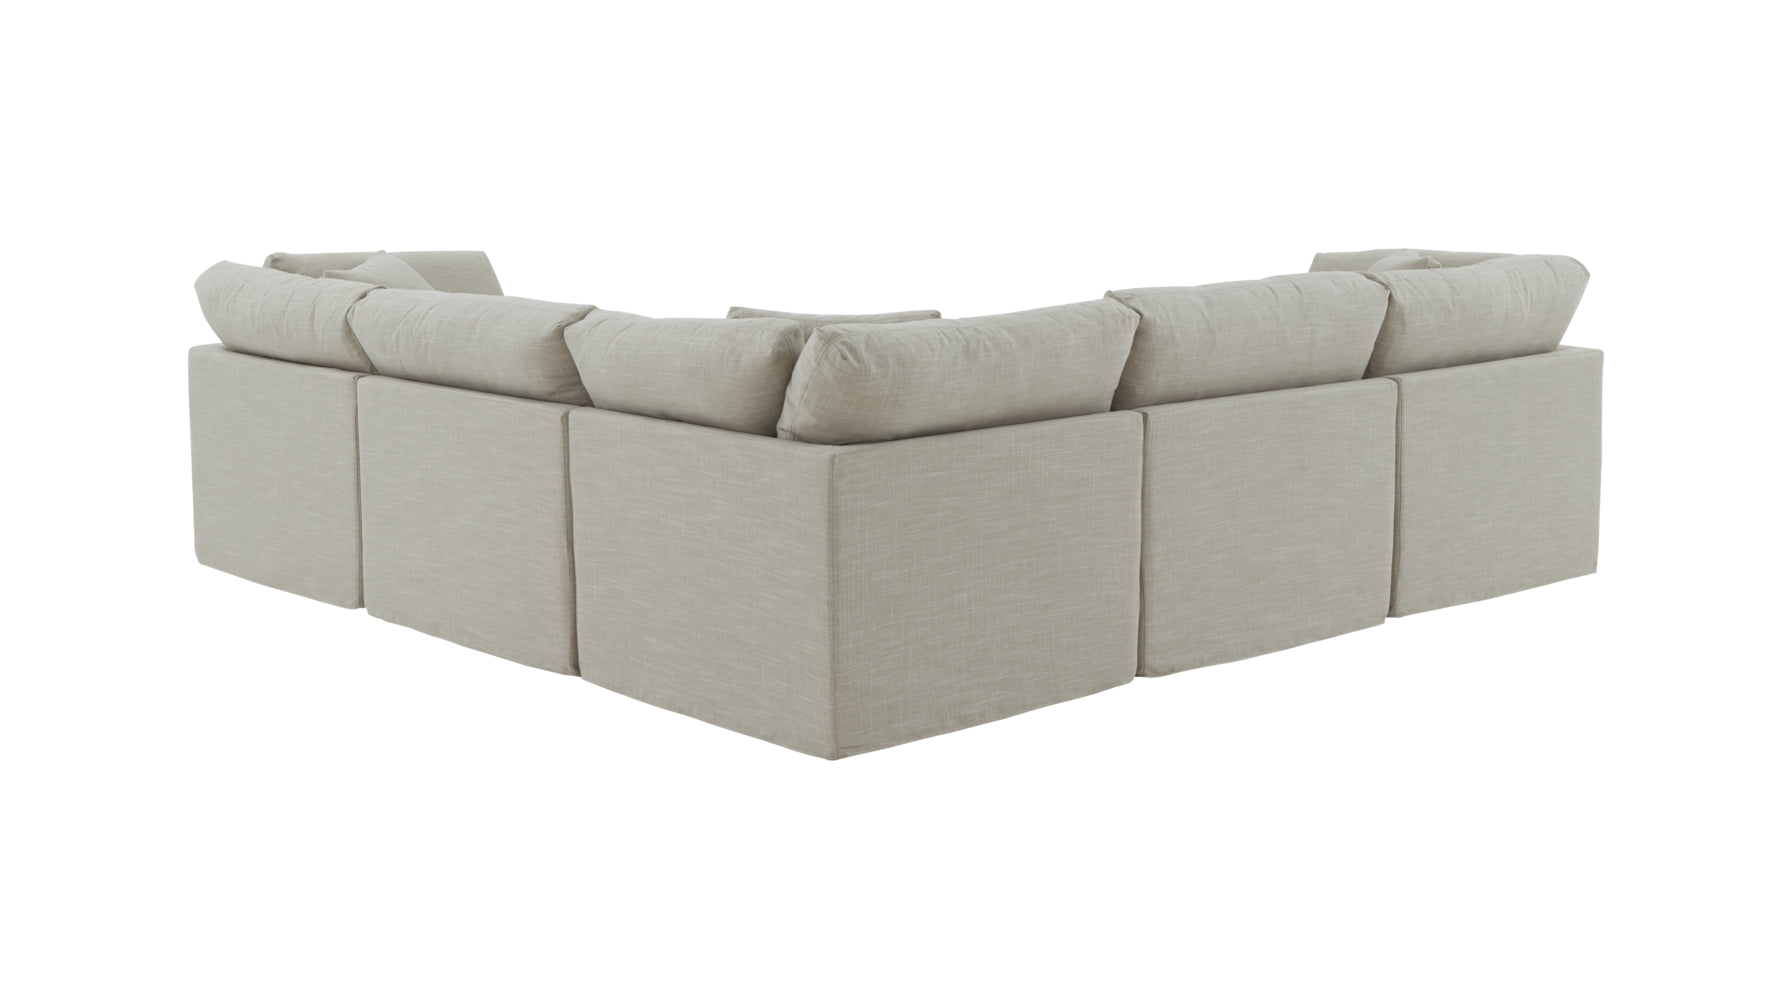 Get Together™ 5-Piece Modular Sectional Closed, Standard, Light Pebble - Image 8